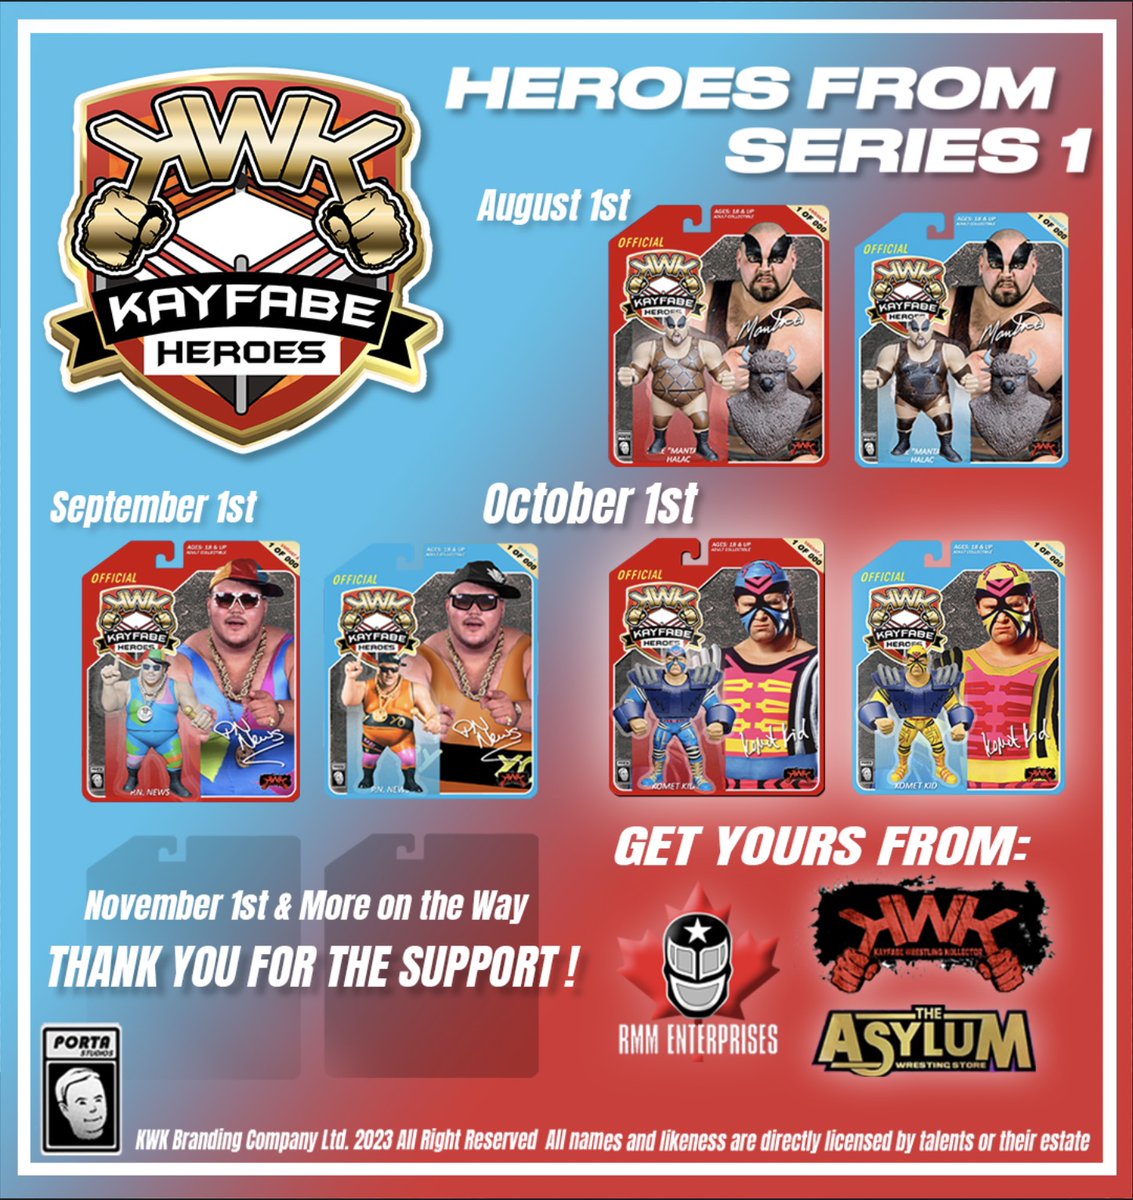 Checklist for KWK Kayfabe Heroes created by Porta Studios. Please note this list is only for the regular versions, Yoshitatsu will be available for preorder on November 1st as Komet Kid ends on October 31st. #hasbrowwf #wwfhasbro #hasbrowwffigures #wwfhasbrofigures